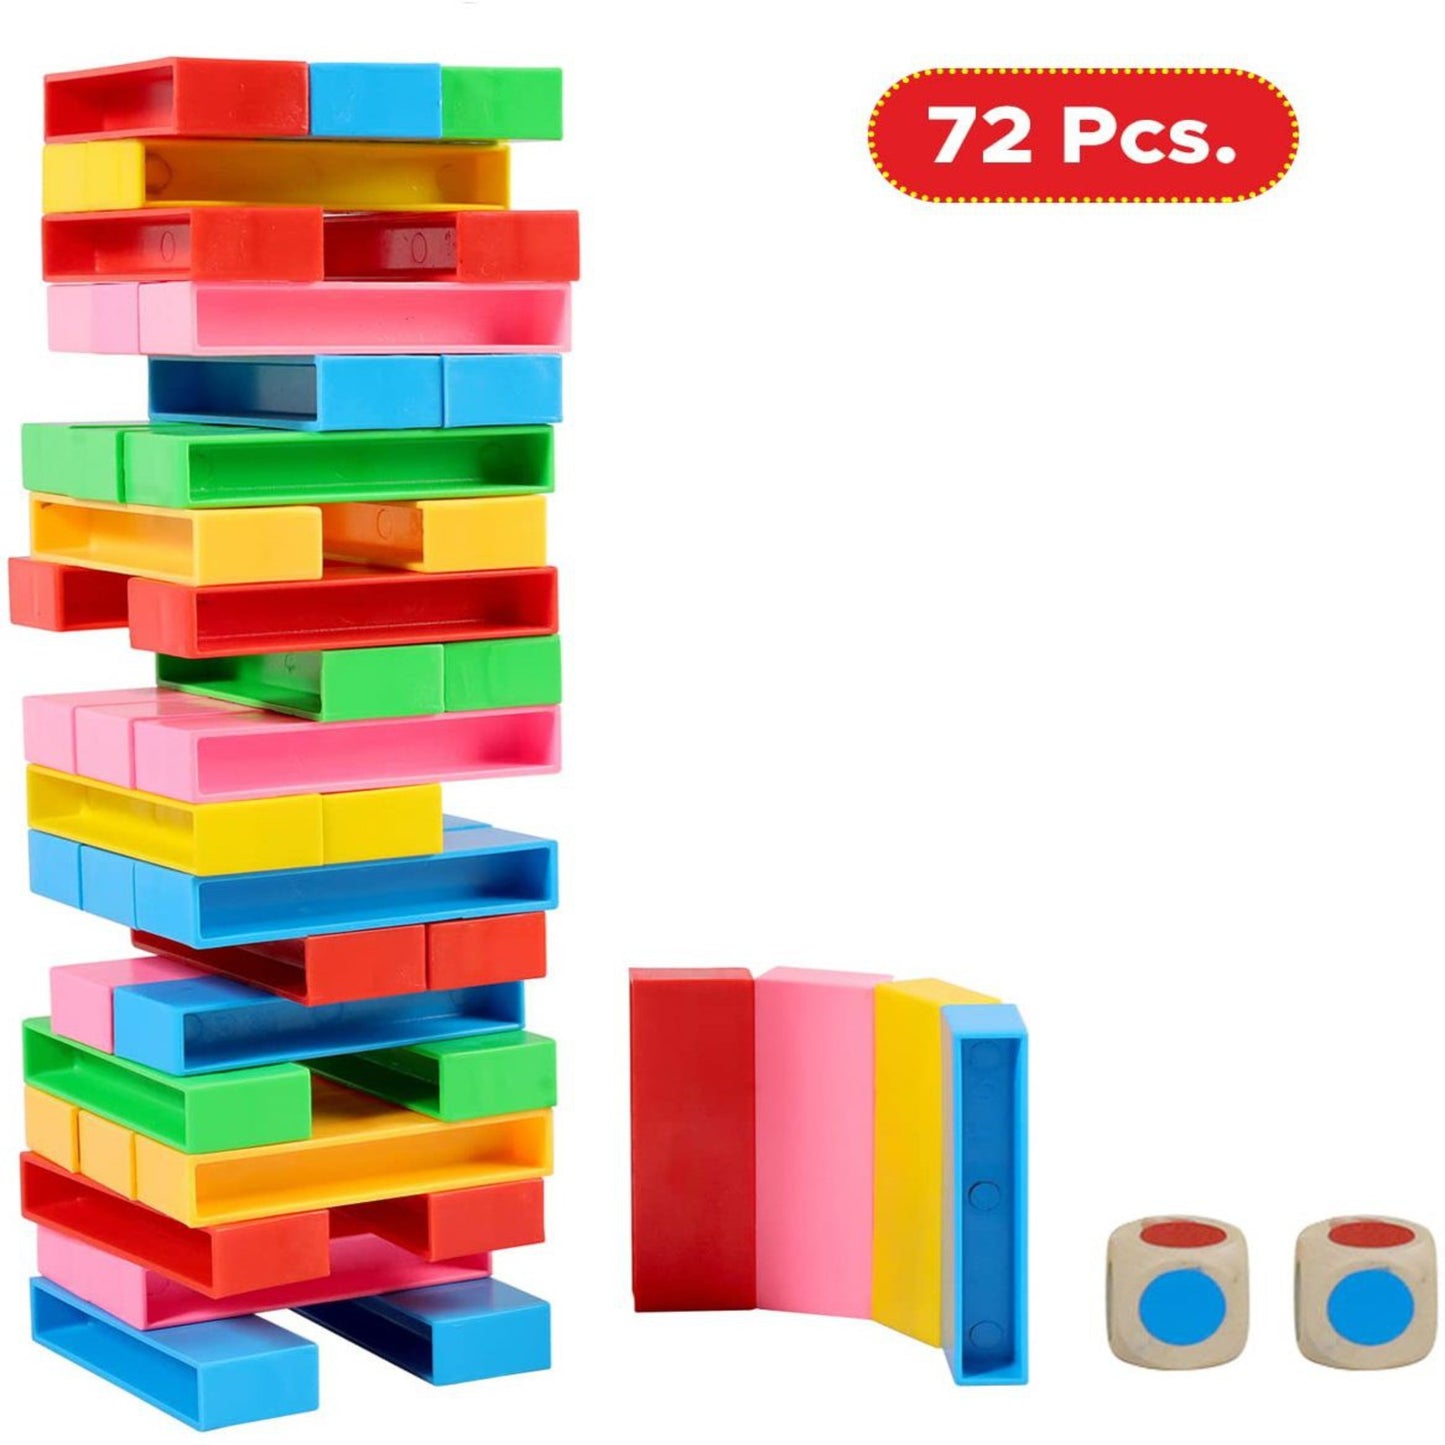 2 in 1 dominos & Jenga Set With 72 Plastic pcs and 1 Wooden Dice